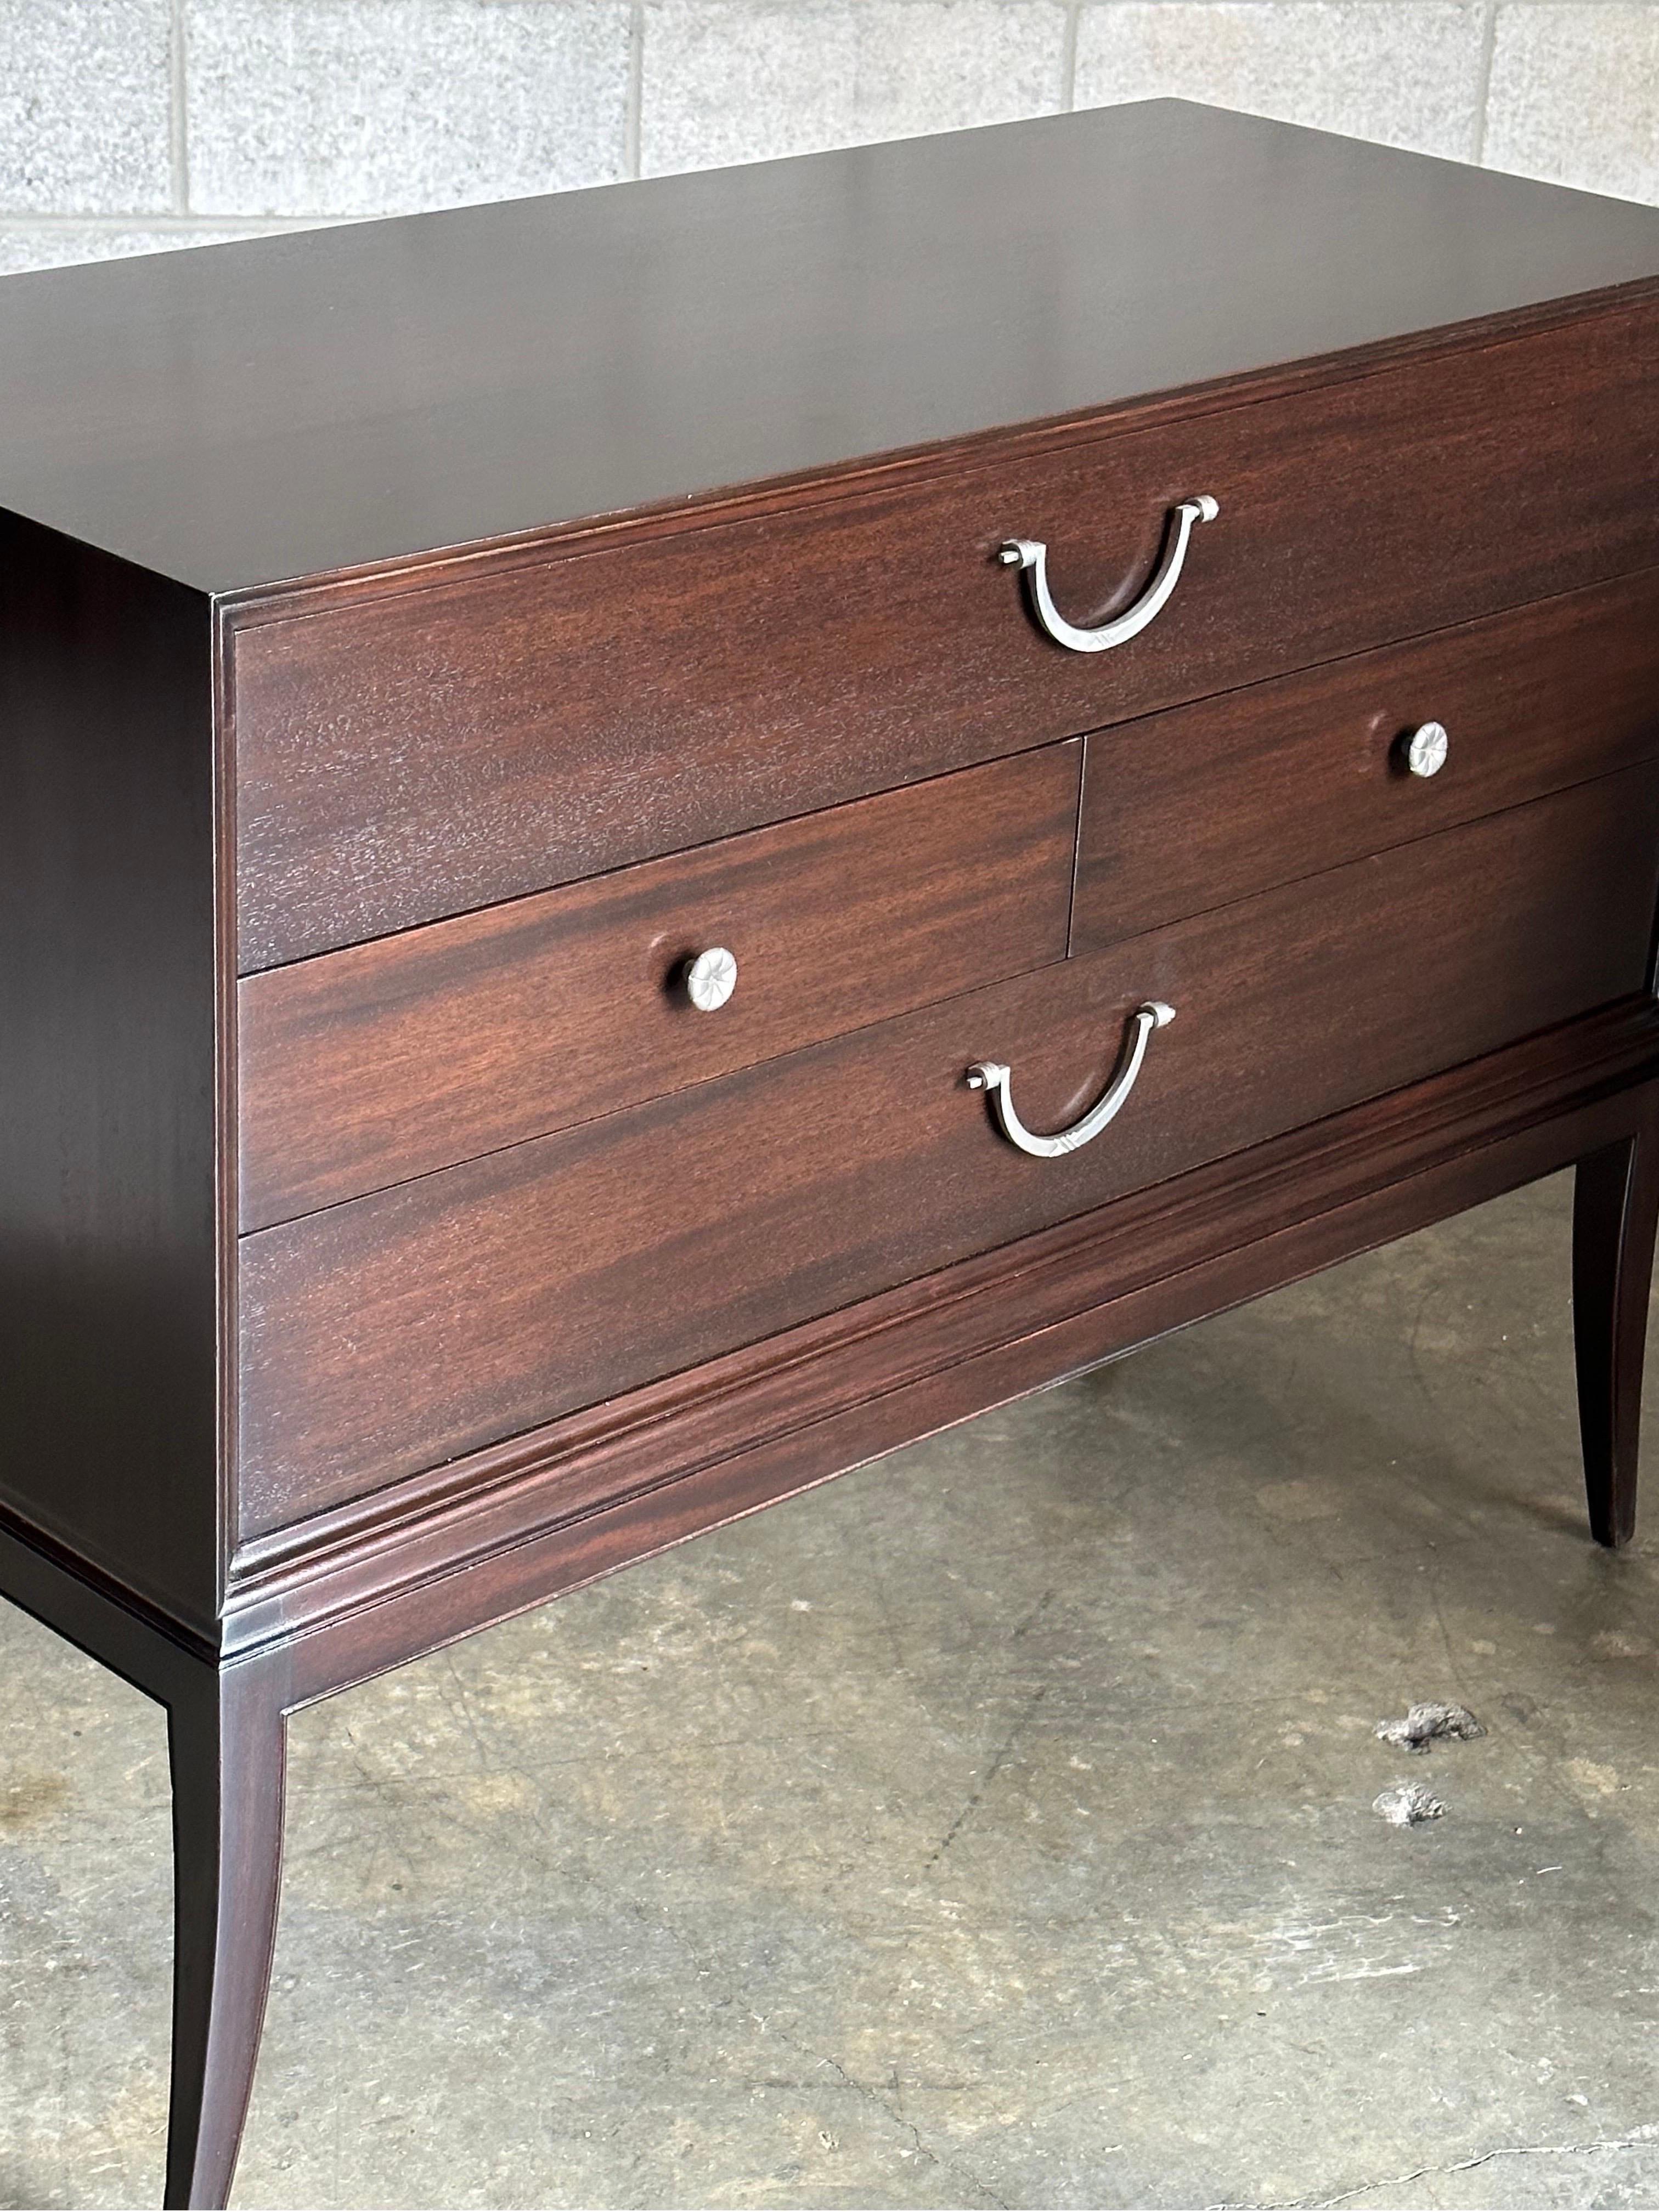 Mahogany Tommi Parzinger Chests for Charak Modern- A Pair For Sale